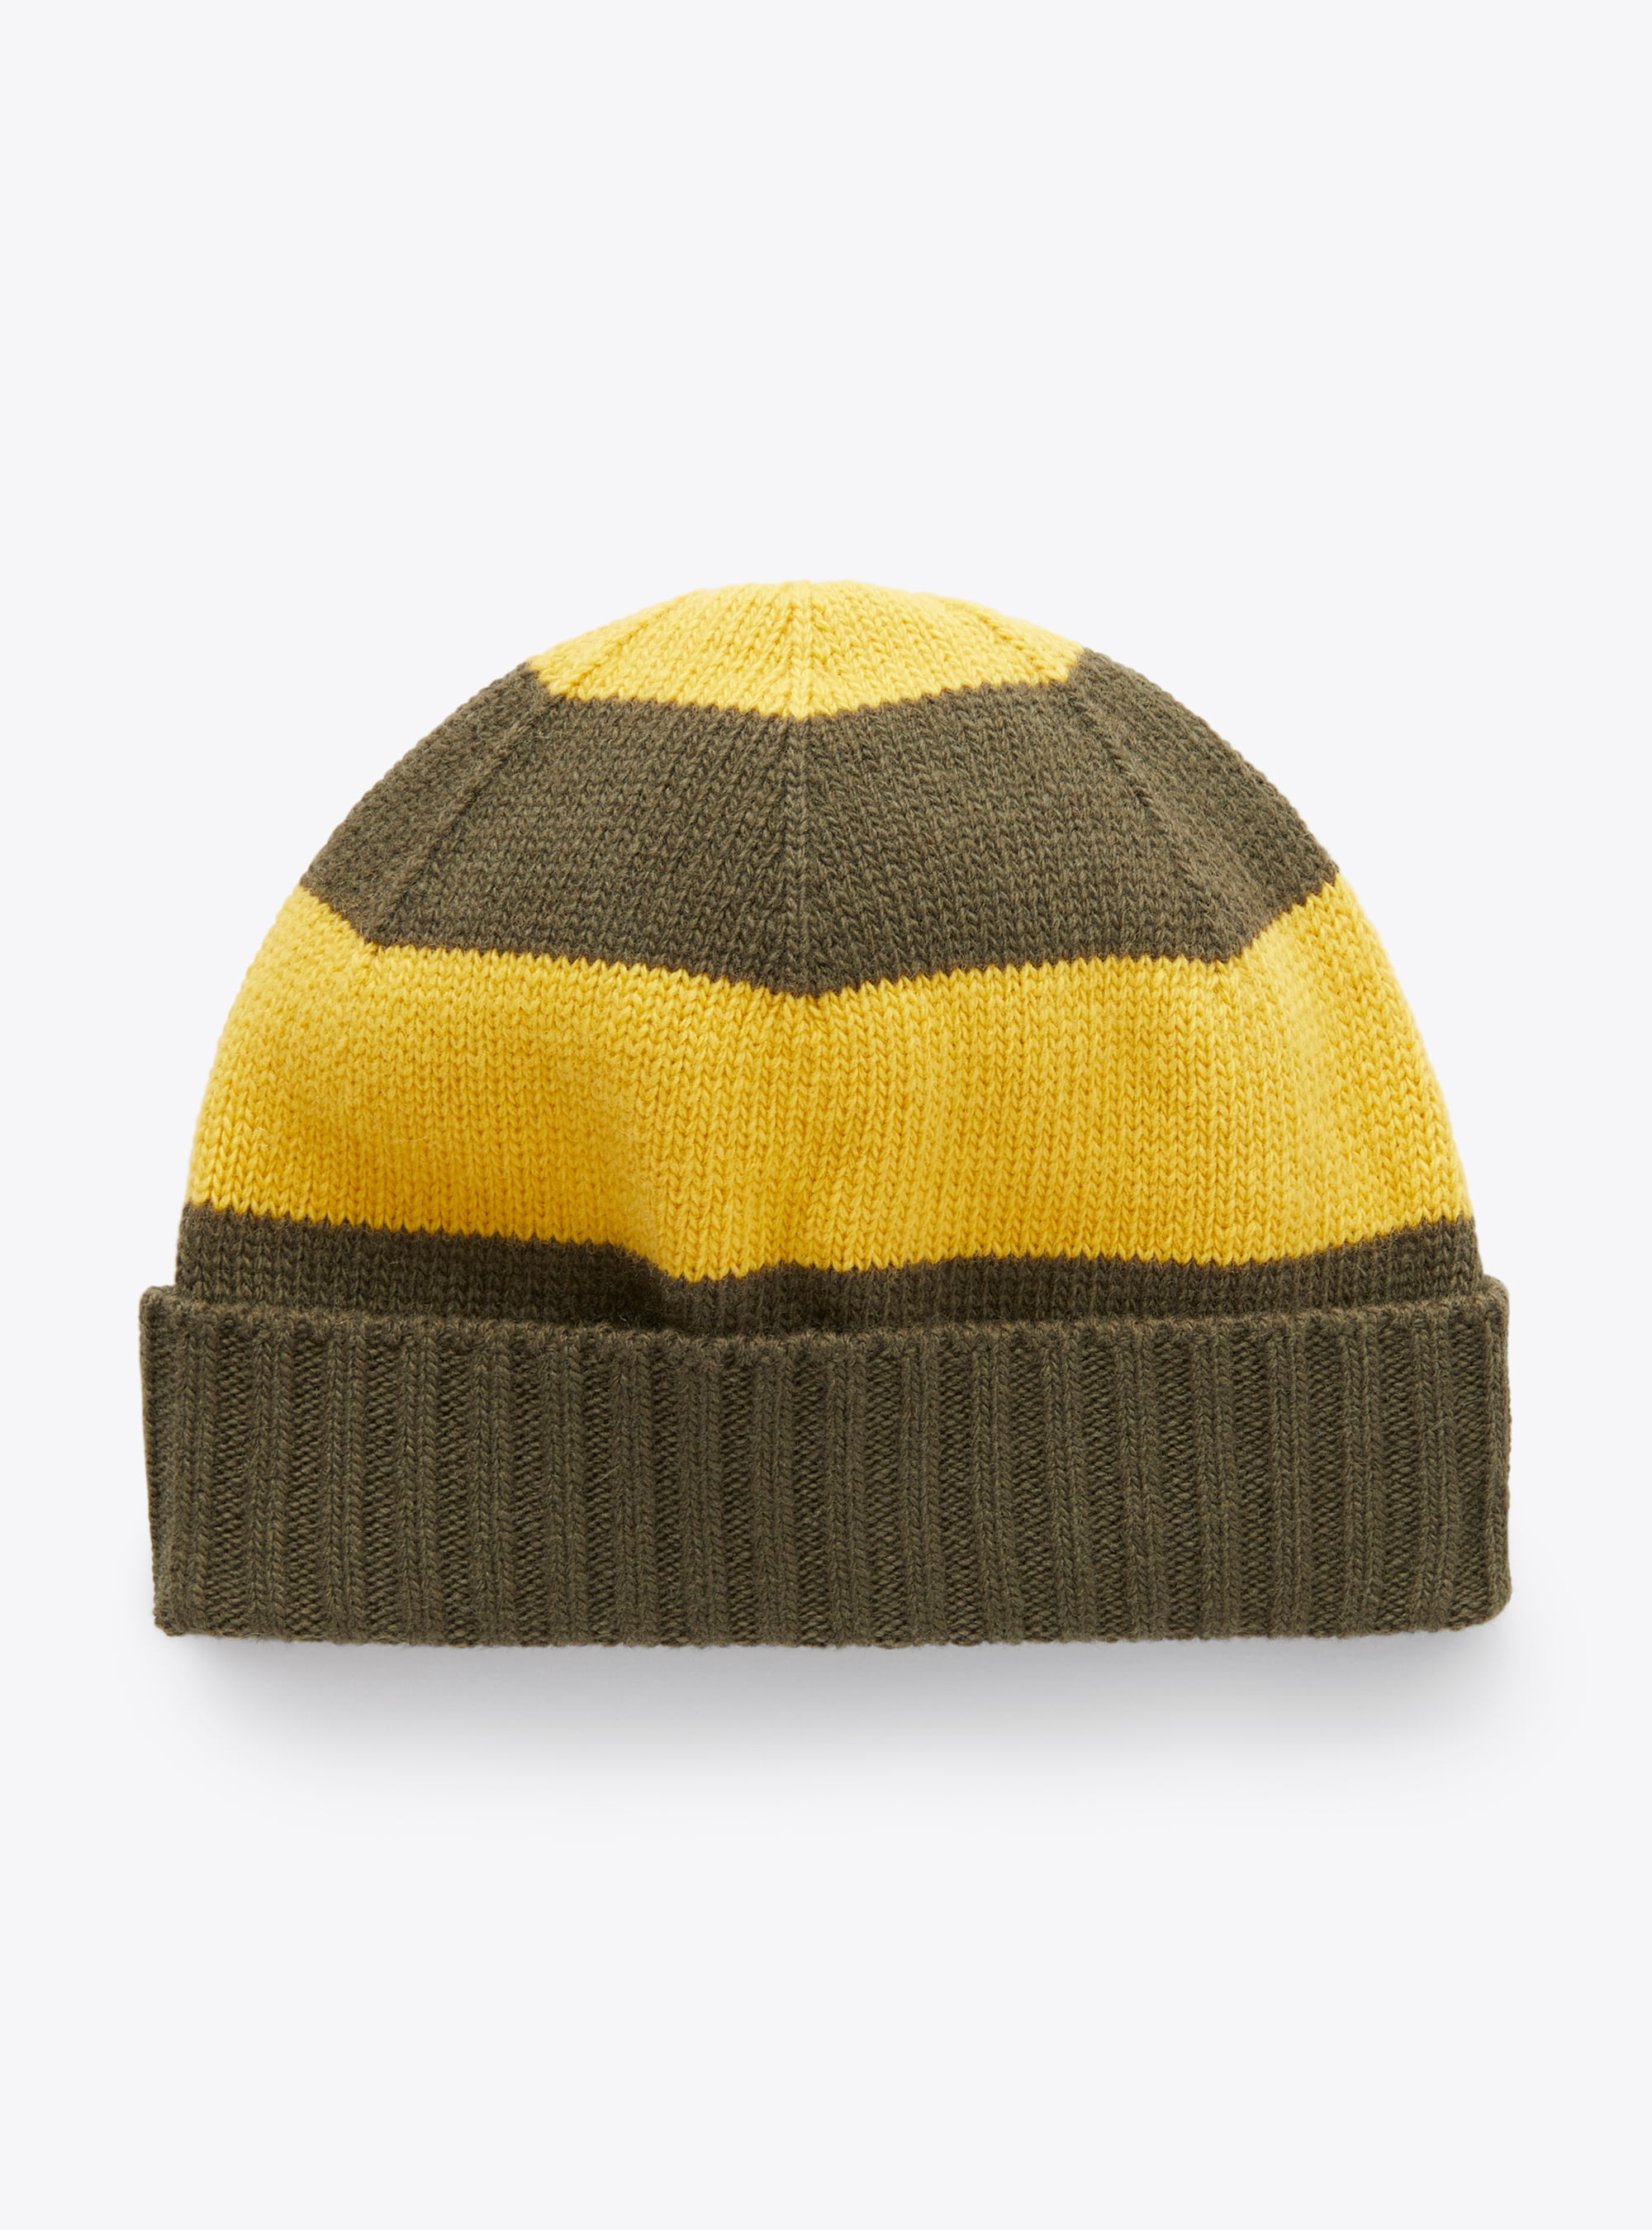 Tricot-knit hat in green and yellow stripes - Accessories - Il Gufo